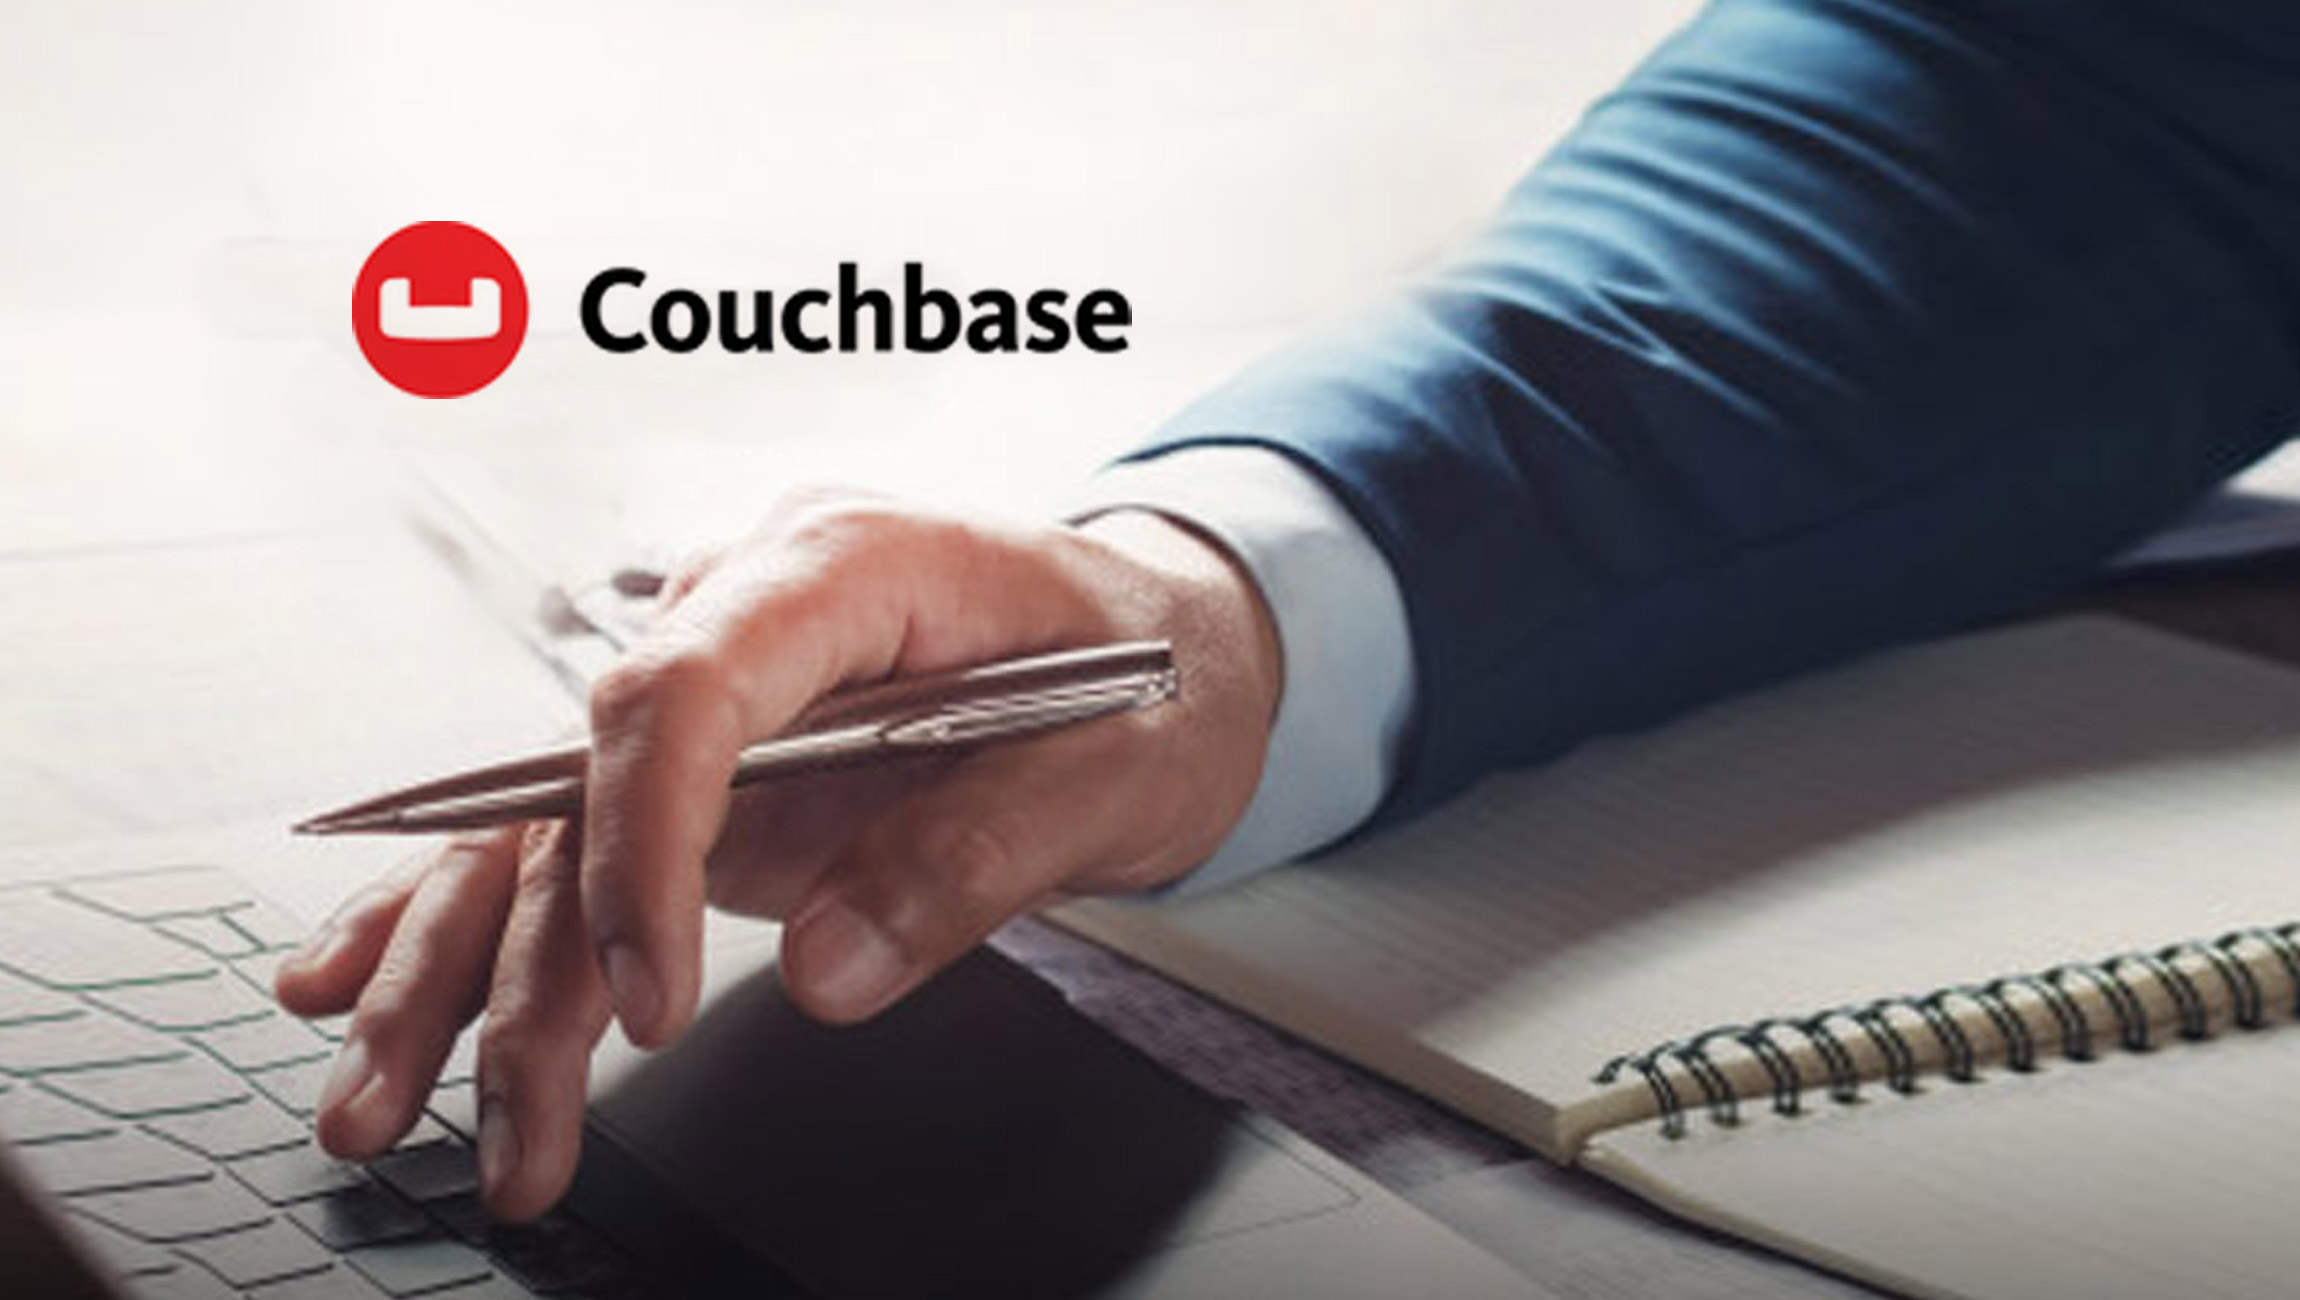 Couchbase Announces Closing of Initial Public Offering